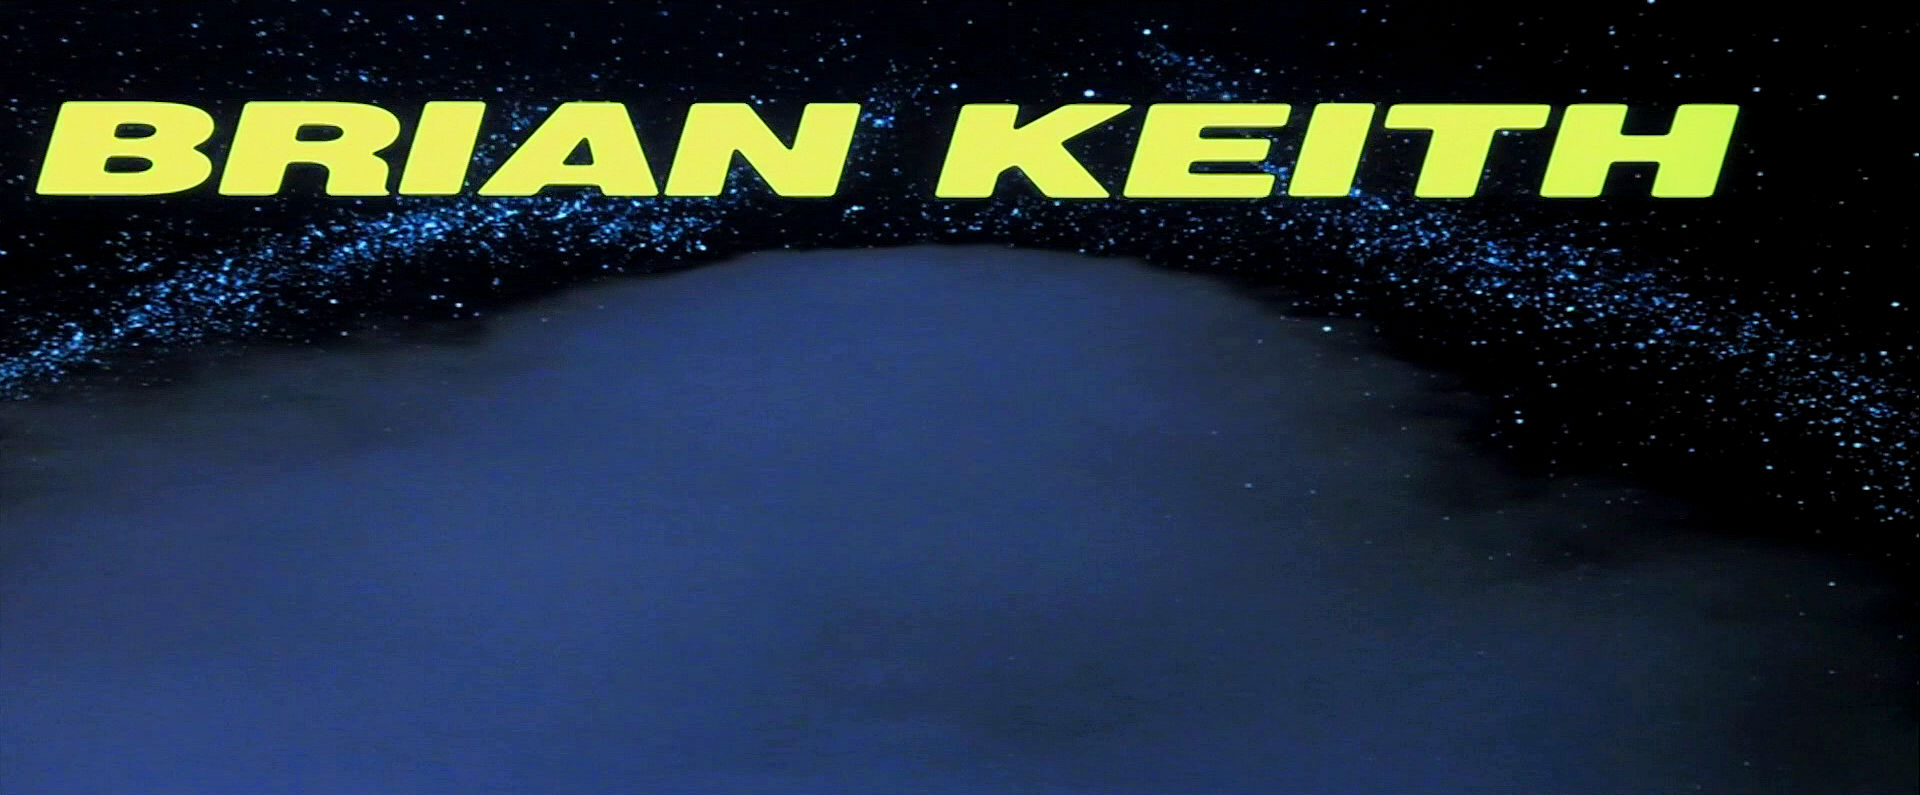 Main title from Meteor (1979) (4). Brian Keith